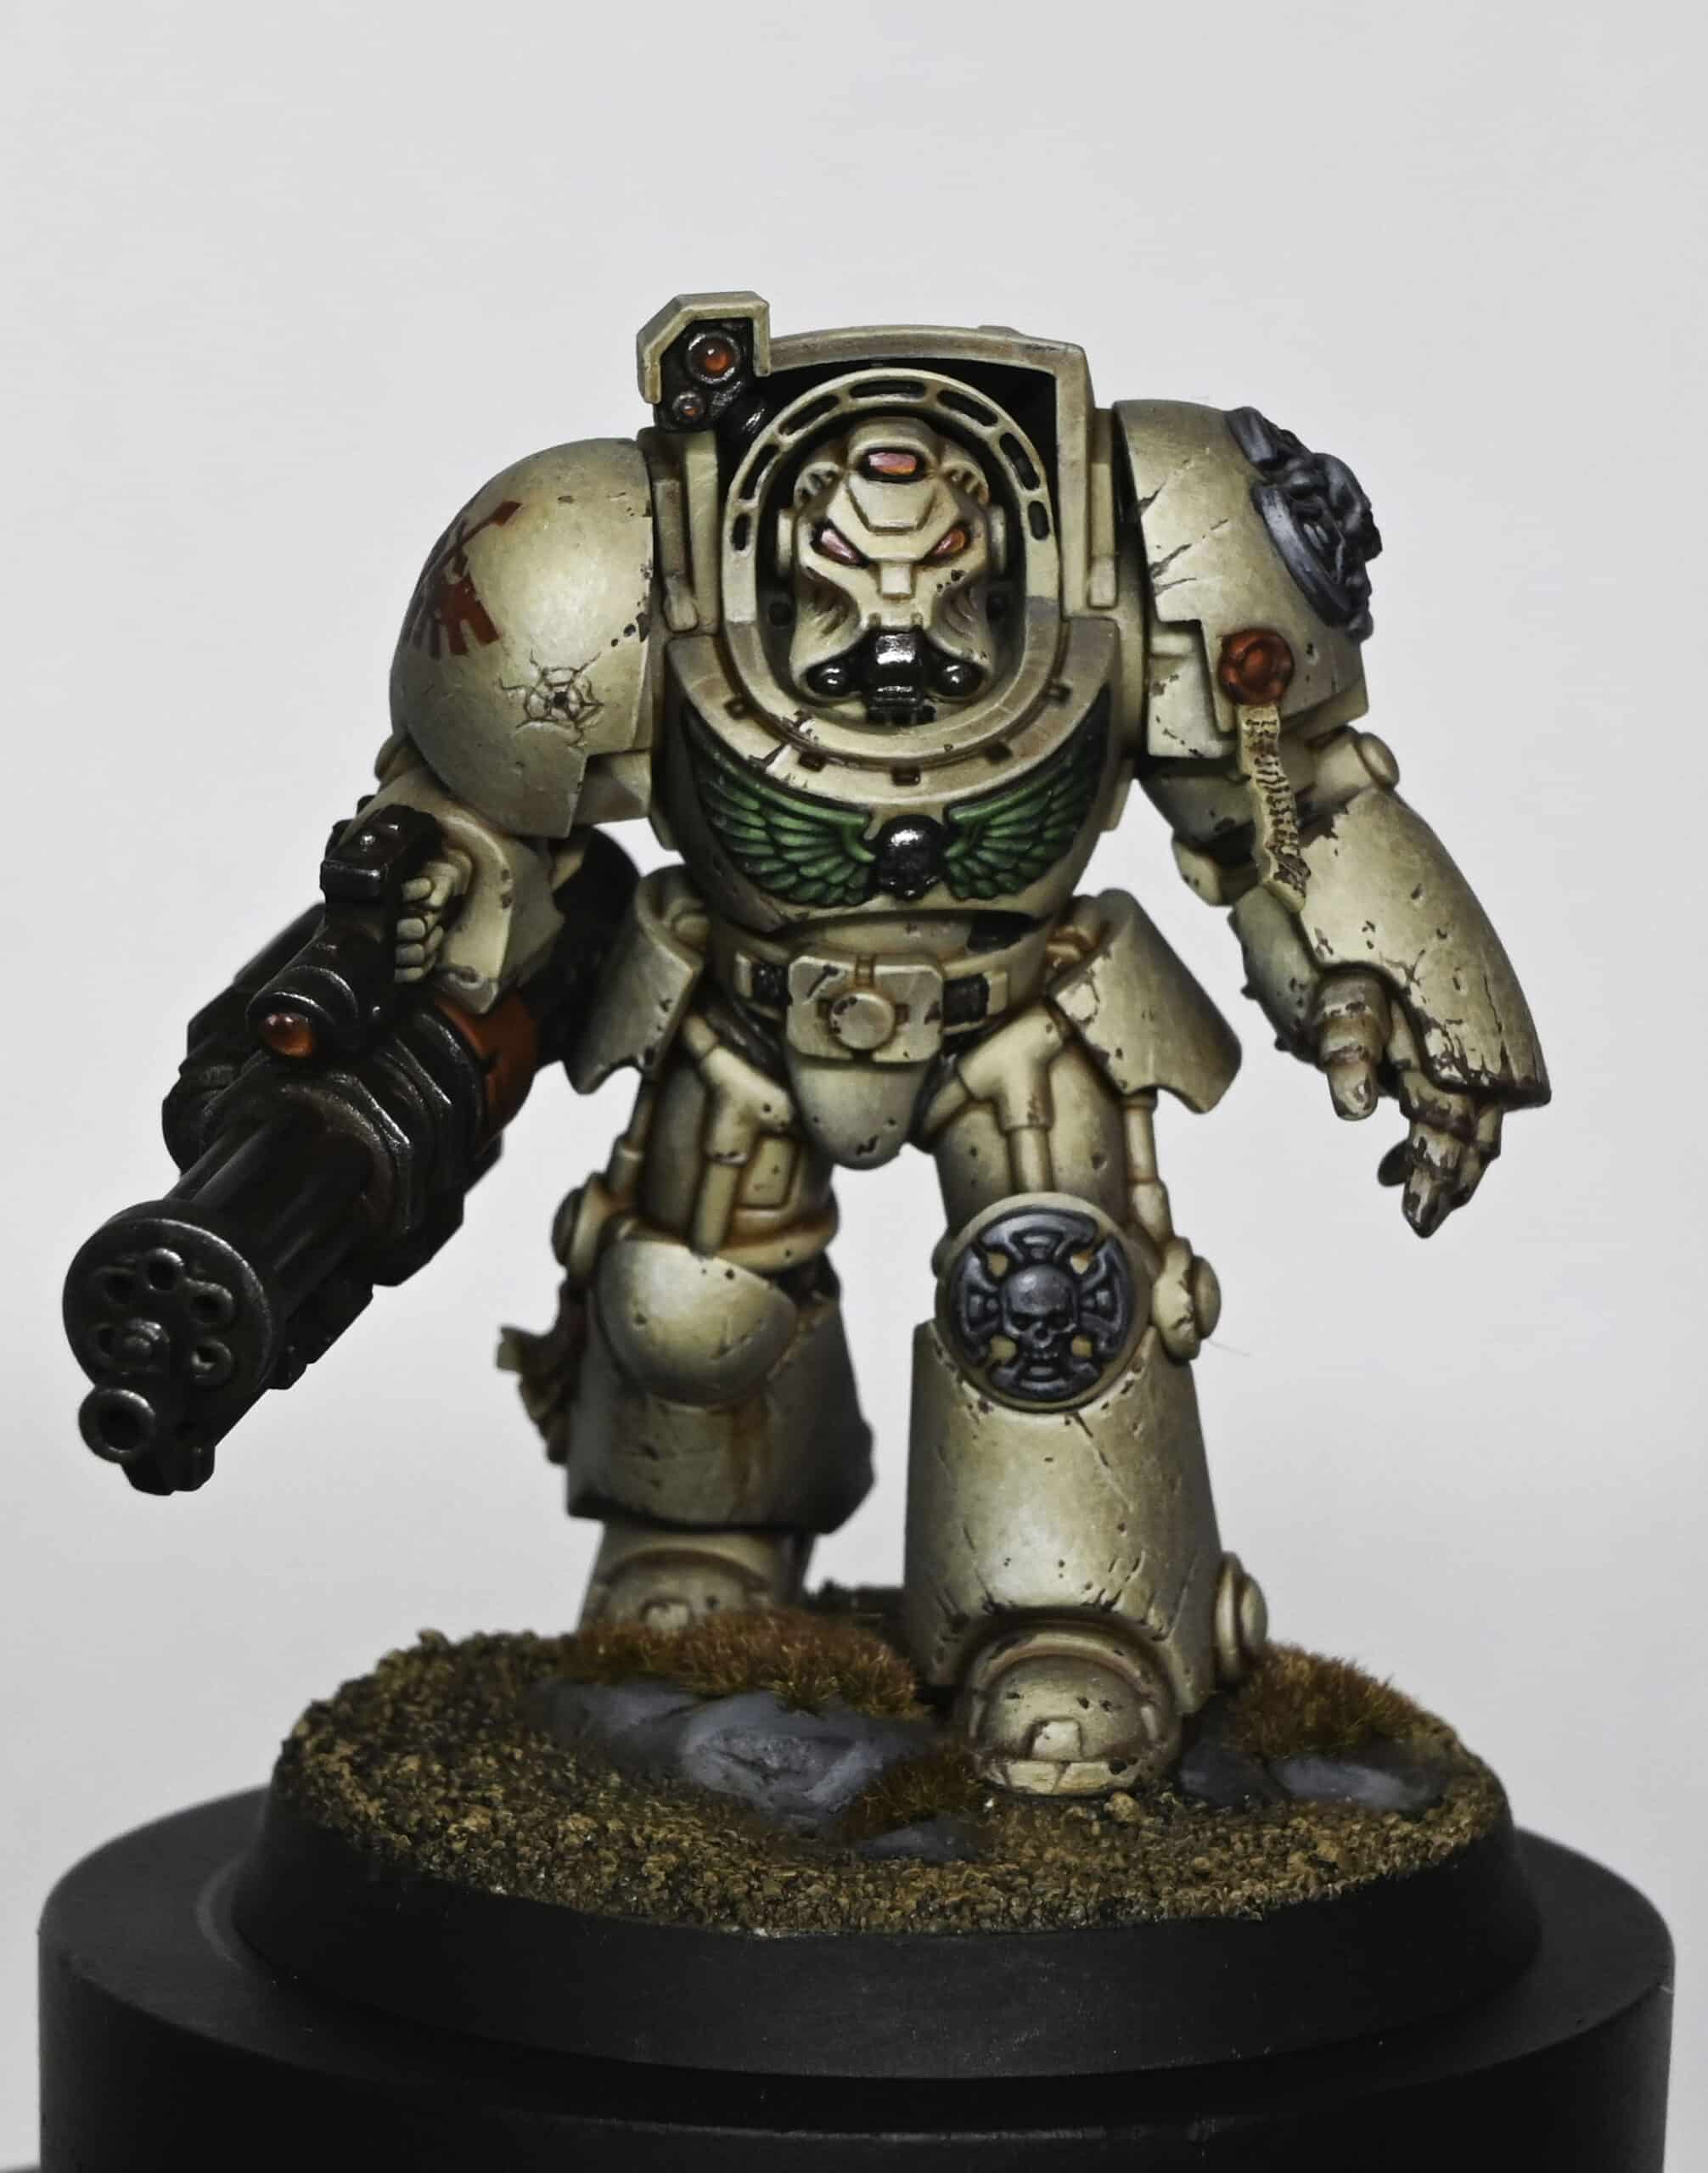 Warhammer 40,000 Leviathan – Short Review and  How to Paint A Deathwing Terminator from the New Leviathan Box!